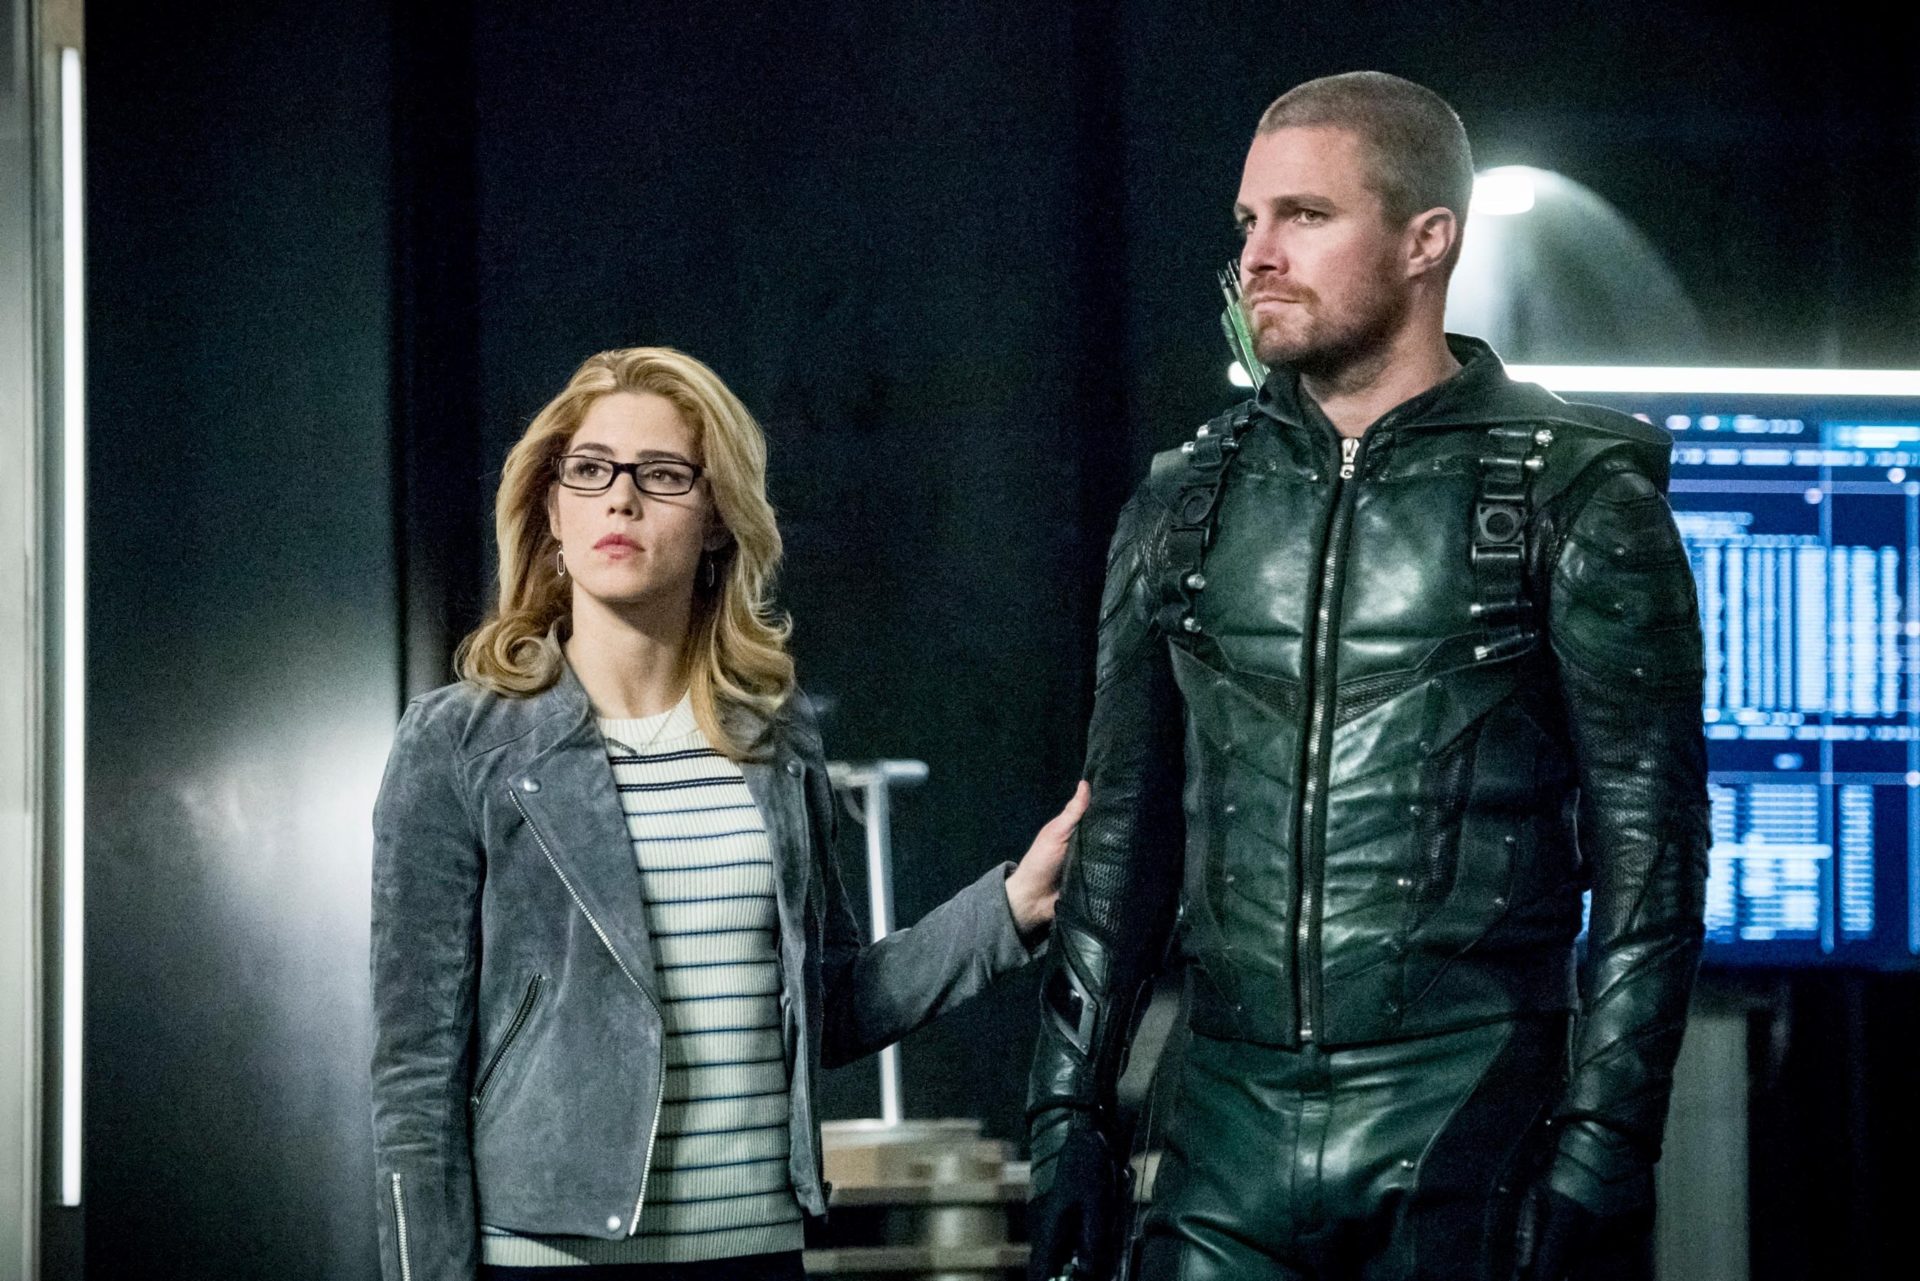 Arrow -- "Spartan" -- Image Number: AR719a_0269b -- Pictured (L-R): Emily Bett Rickards as Felicity Smoak and Stephen Amell as Oliver Queen/Green Arrow -- Photo: Dean Buscher/The CW -- Ã?Â© 2019 The CW Network, LLC. All Rights Reserved.